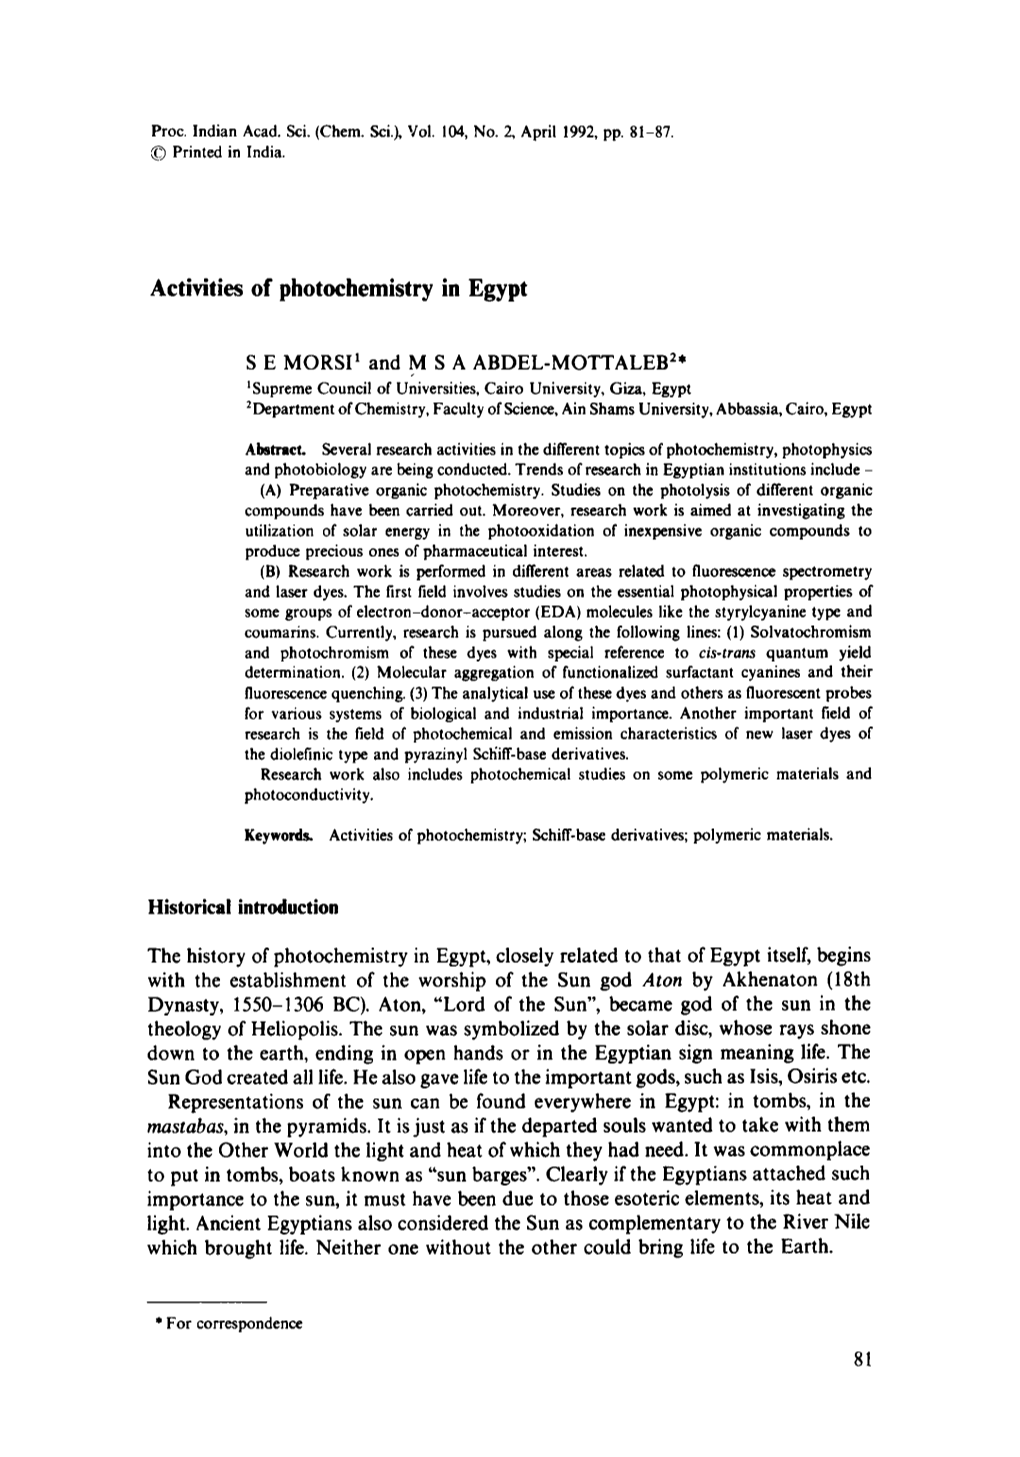 Activities of Photochemistry in Egypt